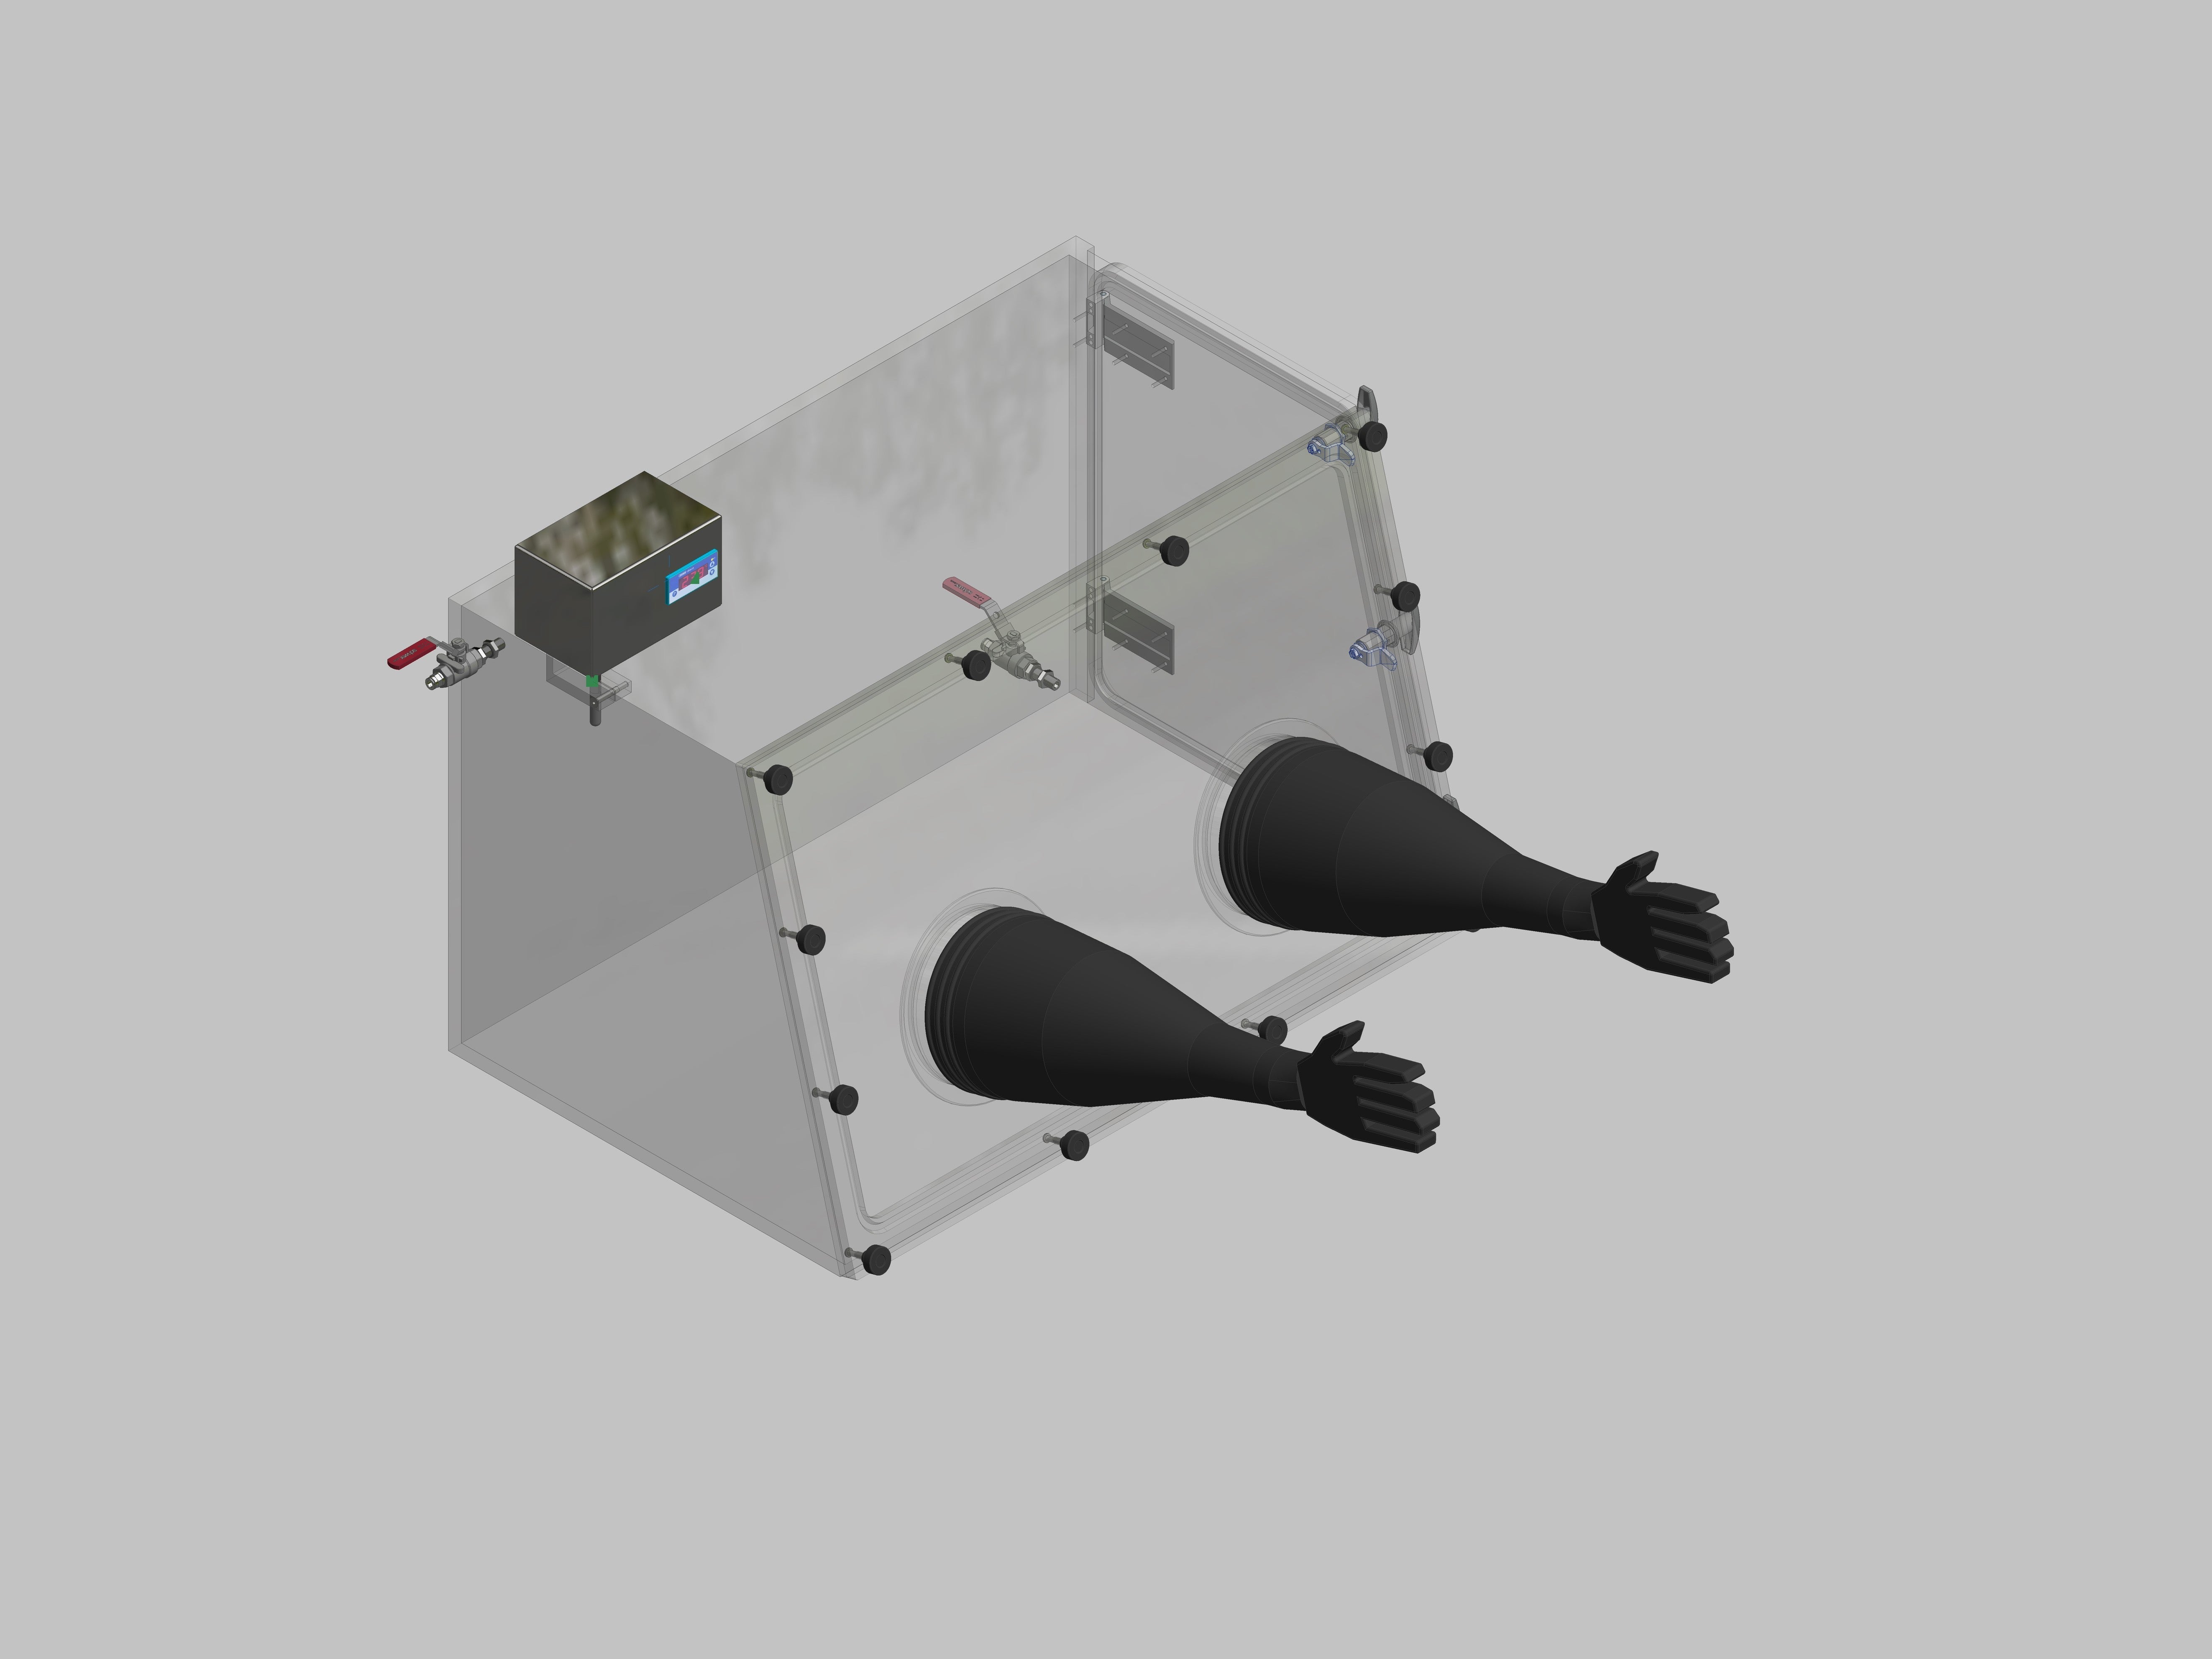 Glovebox made of acrylic &gt; Gas filling: by hand, front design: removable, side design: hinged doors, control: humidity display